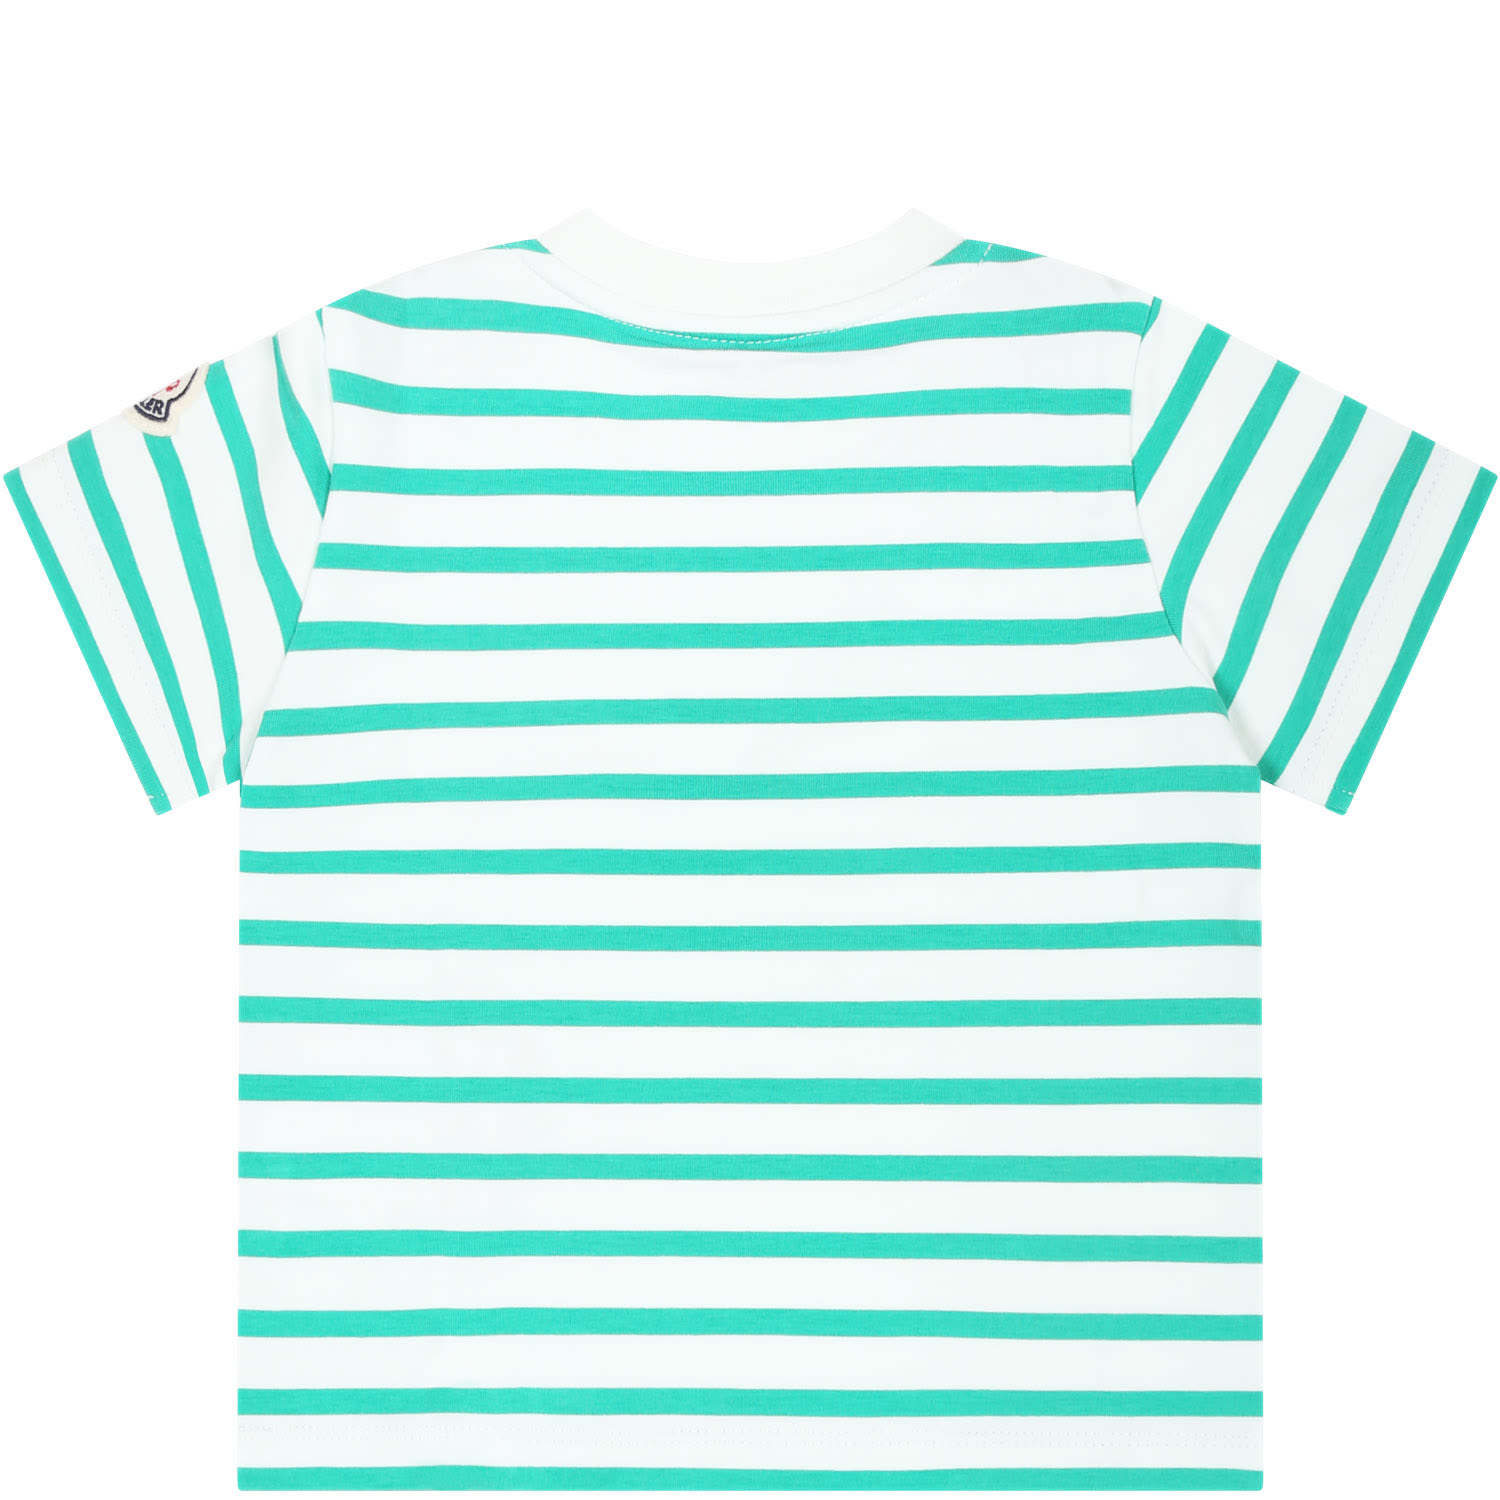 Shop Moncler Green T-shirt For Baby Boy With Logo